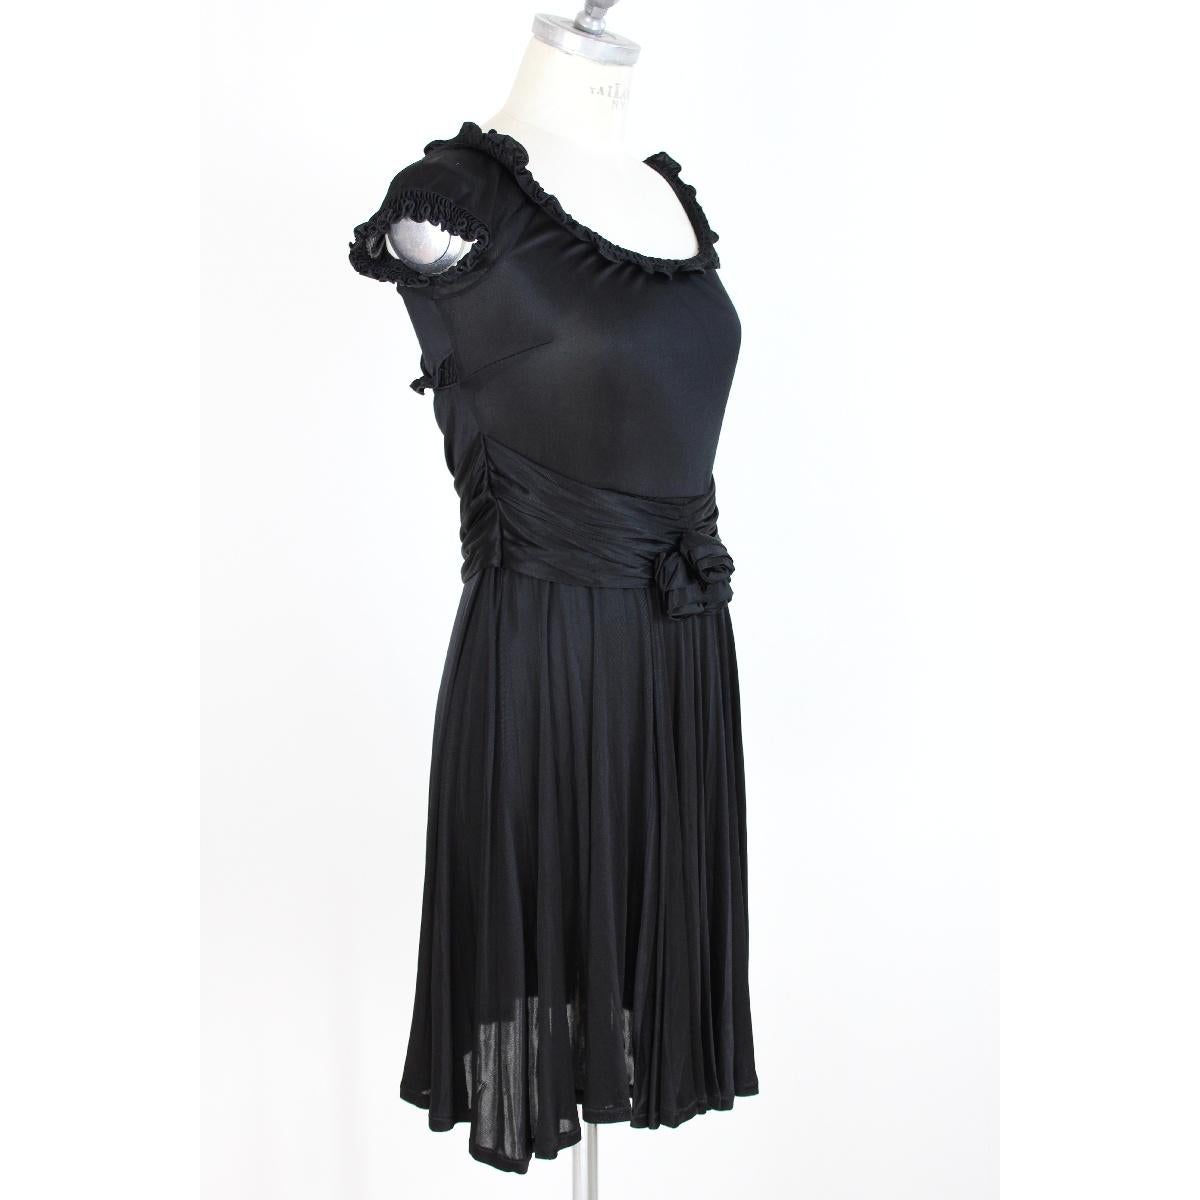 Blumarine vintage dress for women. Black color, rose-shaped bow at the waist, sleeveless. Rayon fabric made in Italy. Elegant evening dress. Vintage, in excellent condition.

SIZE 42 IT 8 US 10 UK

Shoulders: 42 cm
Length: 84 cm
Bust / chest: 47 cm